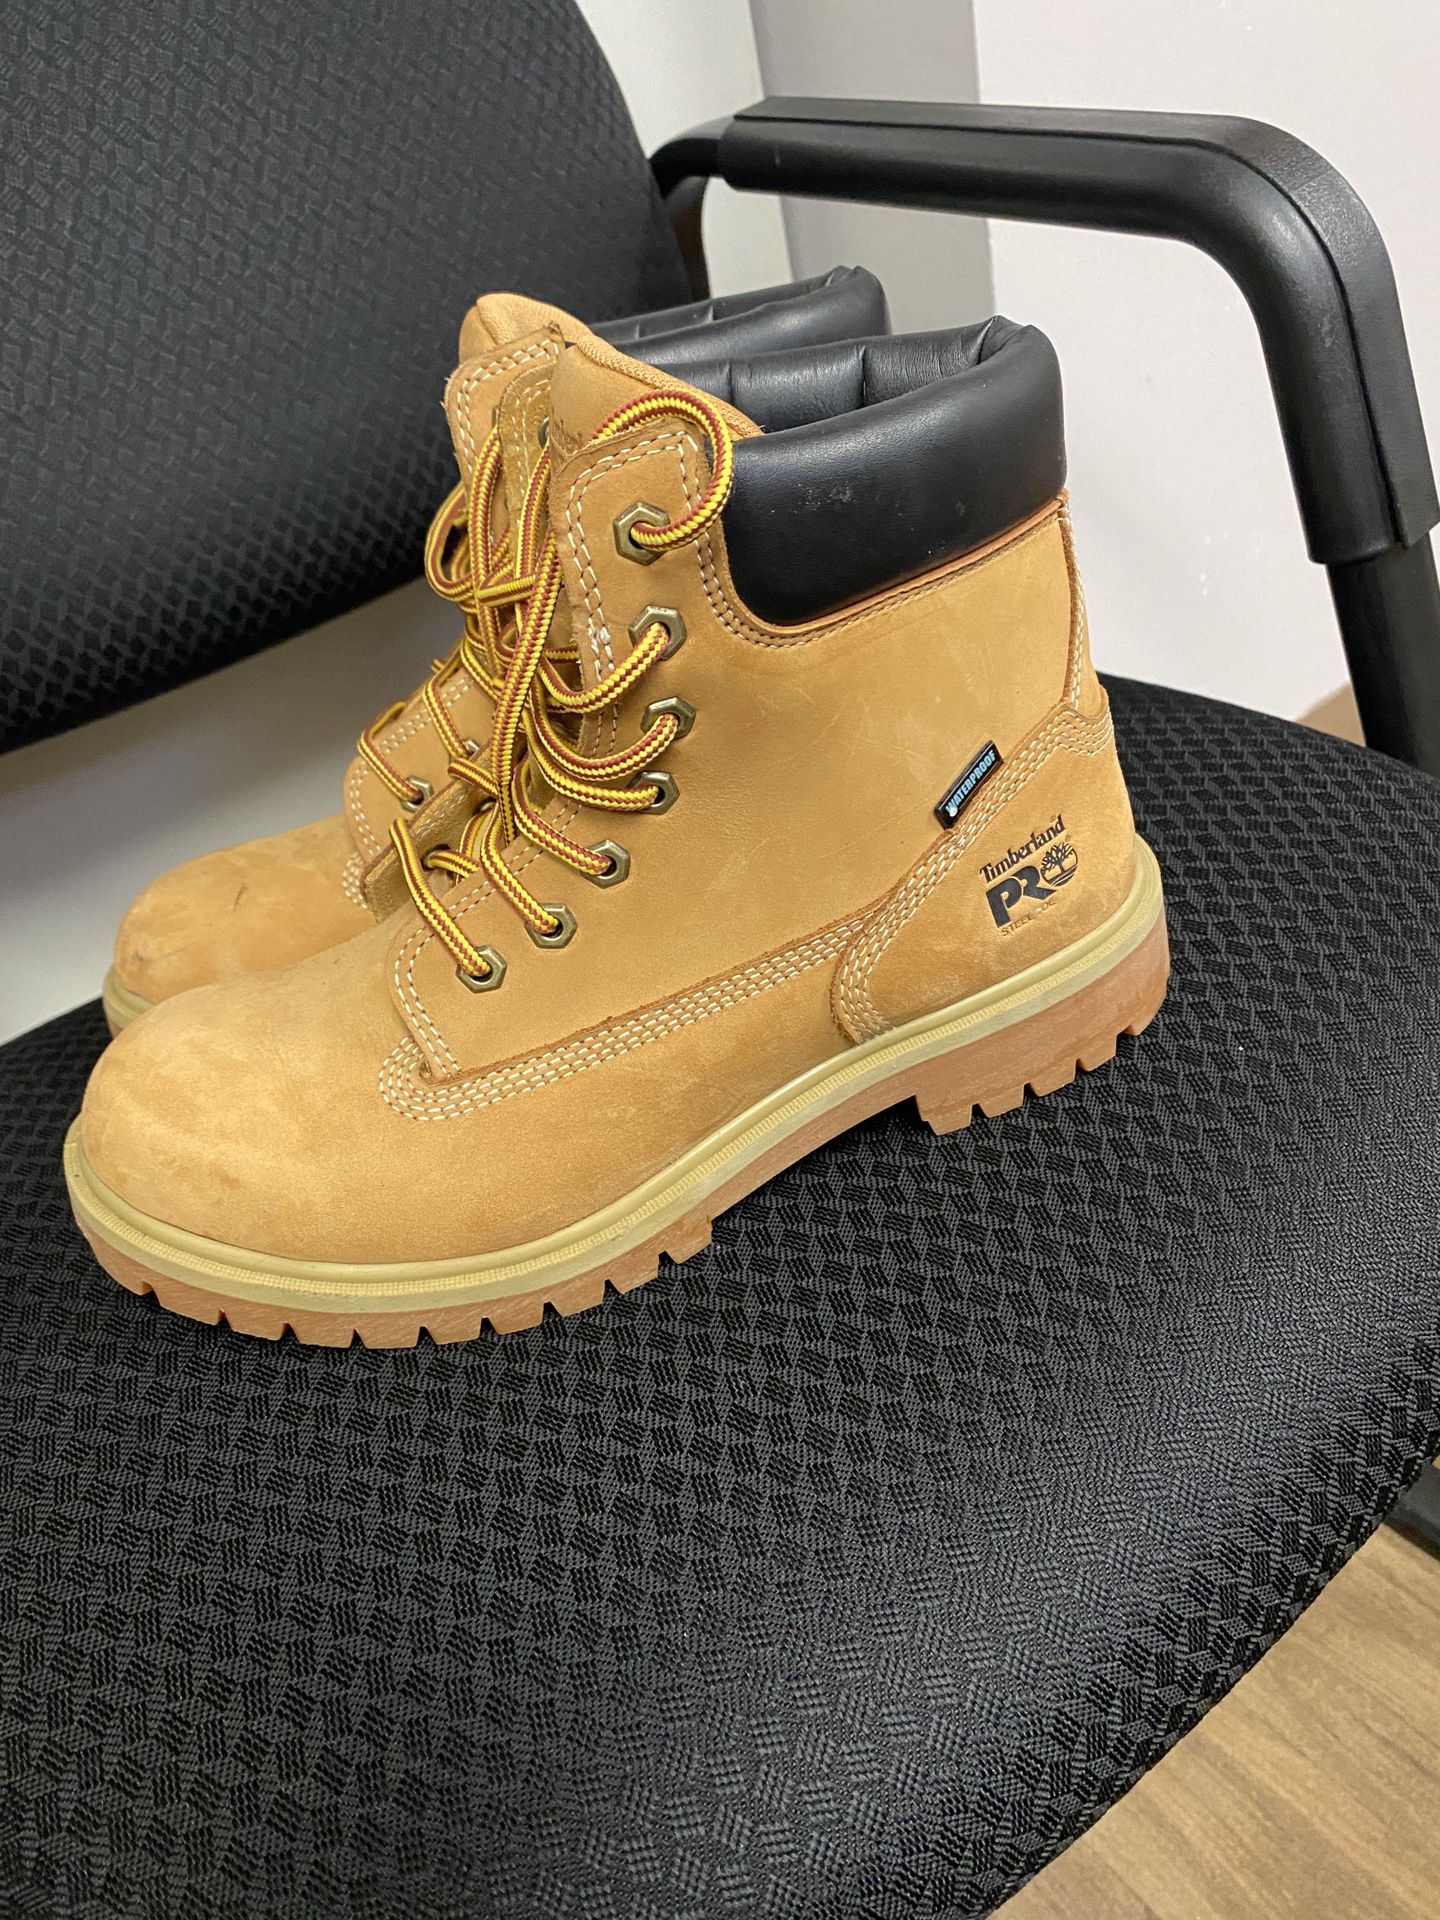 Women’s size 8, steel toe Timberland boots